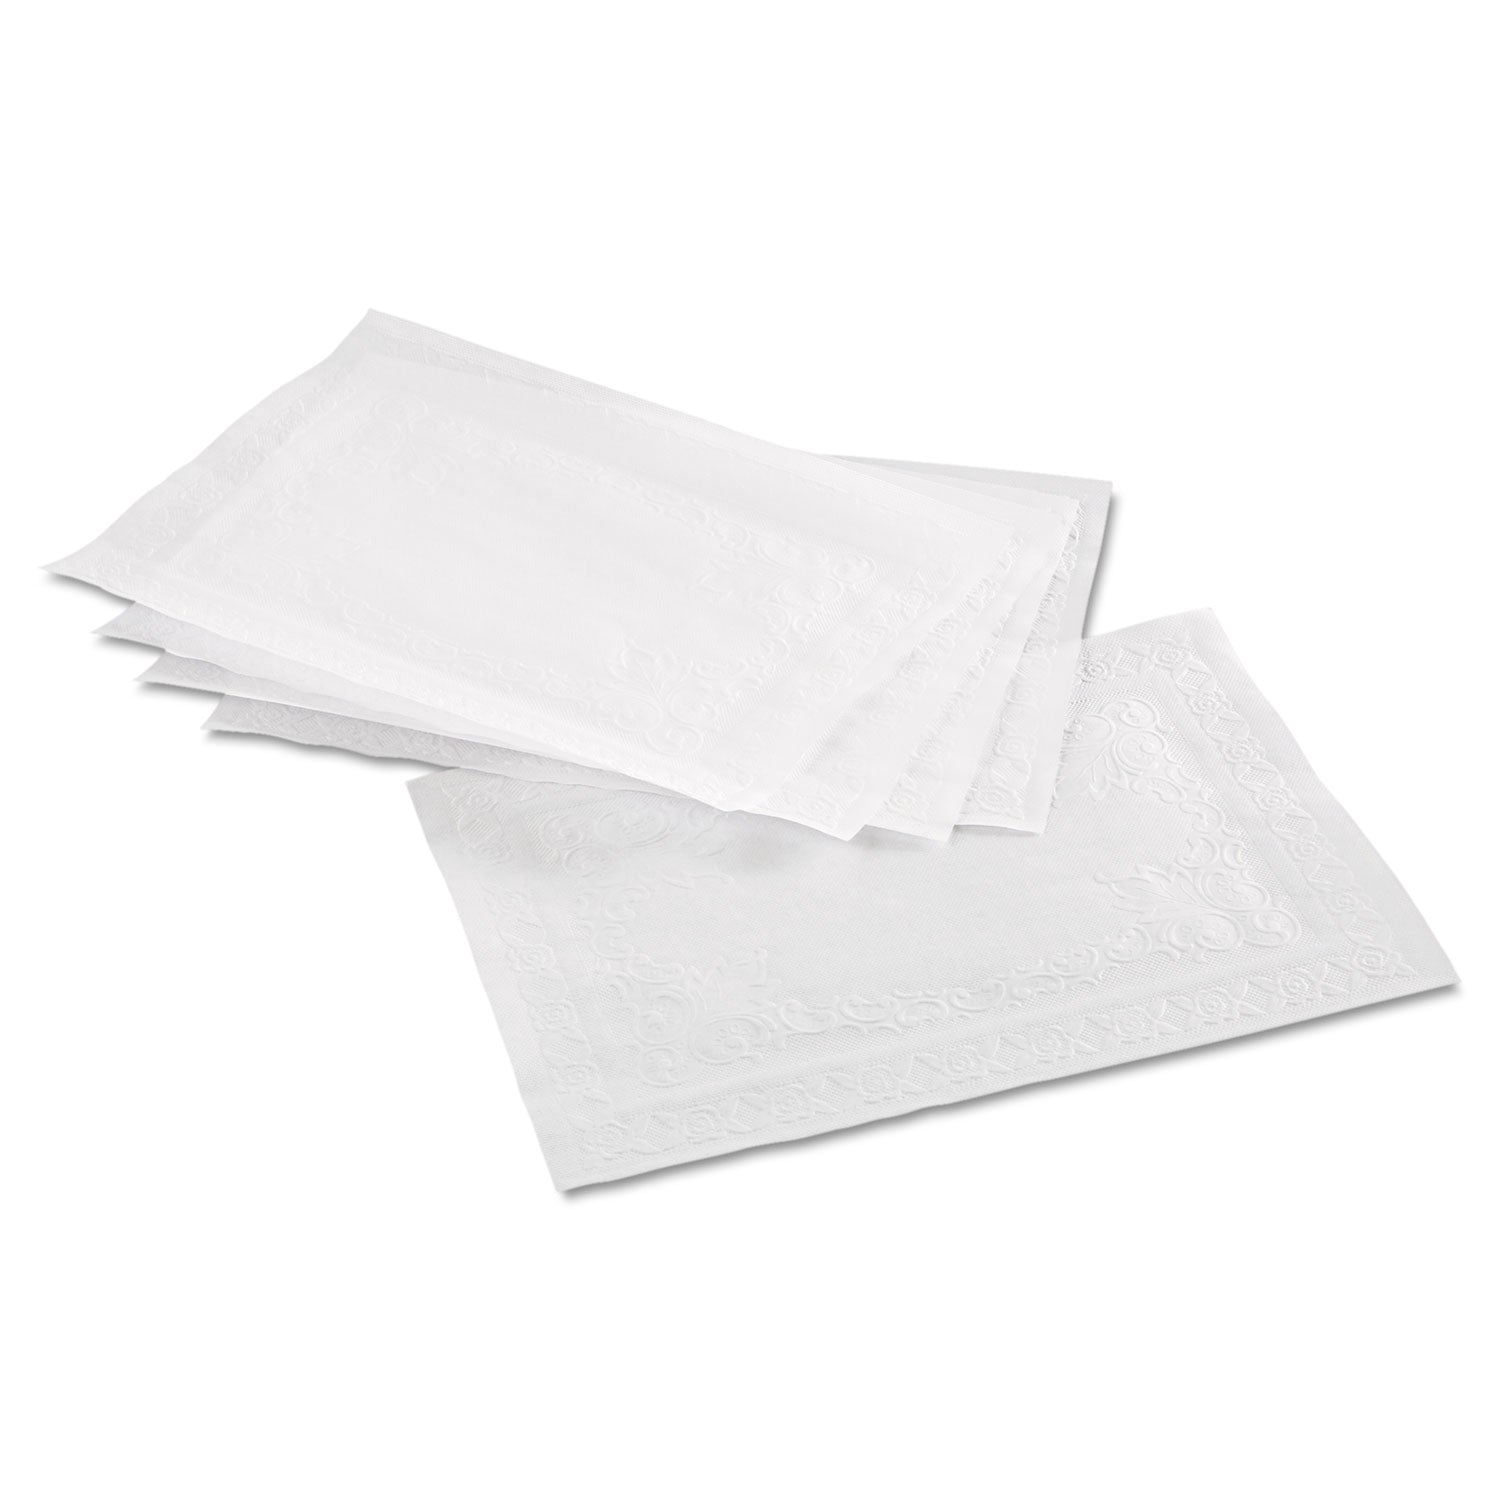 Classic Embossed Straight Edge Placemats, 10 x 14, White, 1,000/Carton - 